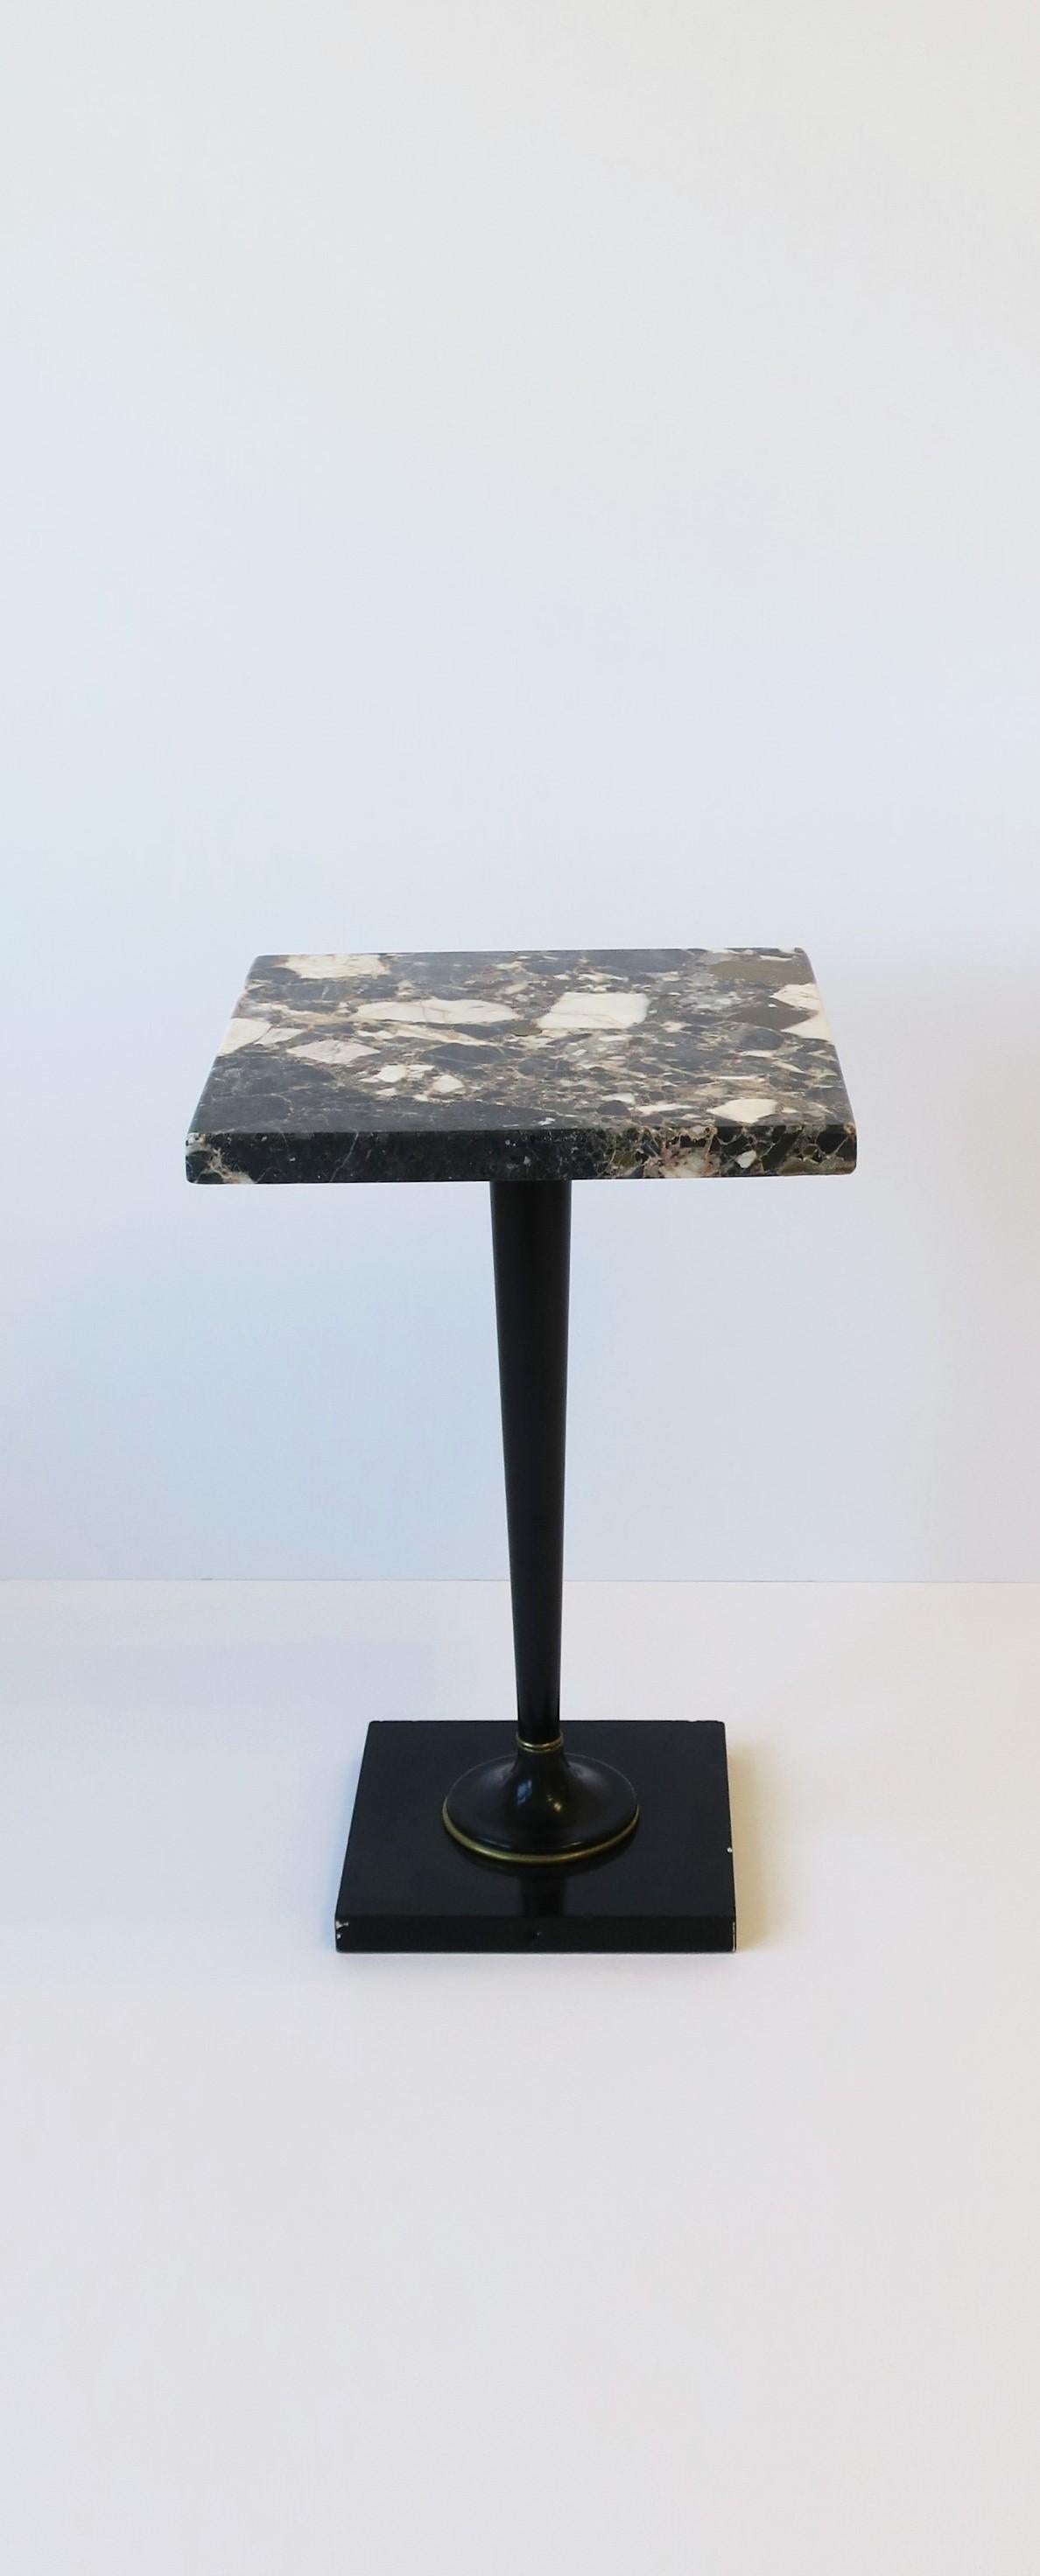 A small multicolored marble and black lacquered side or drinks table from Germany, circa mid-20th century. Square top is marble; prominent hues include dark blue, blue-grey, dark taupe, and white. Base is marble finished with black lacquer, center